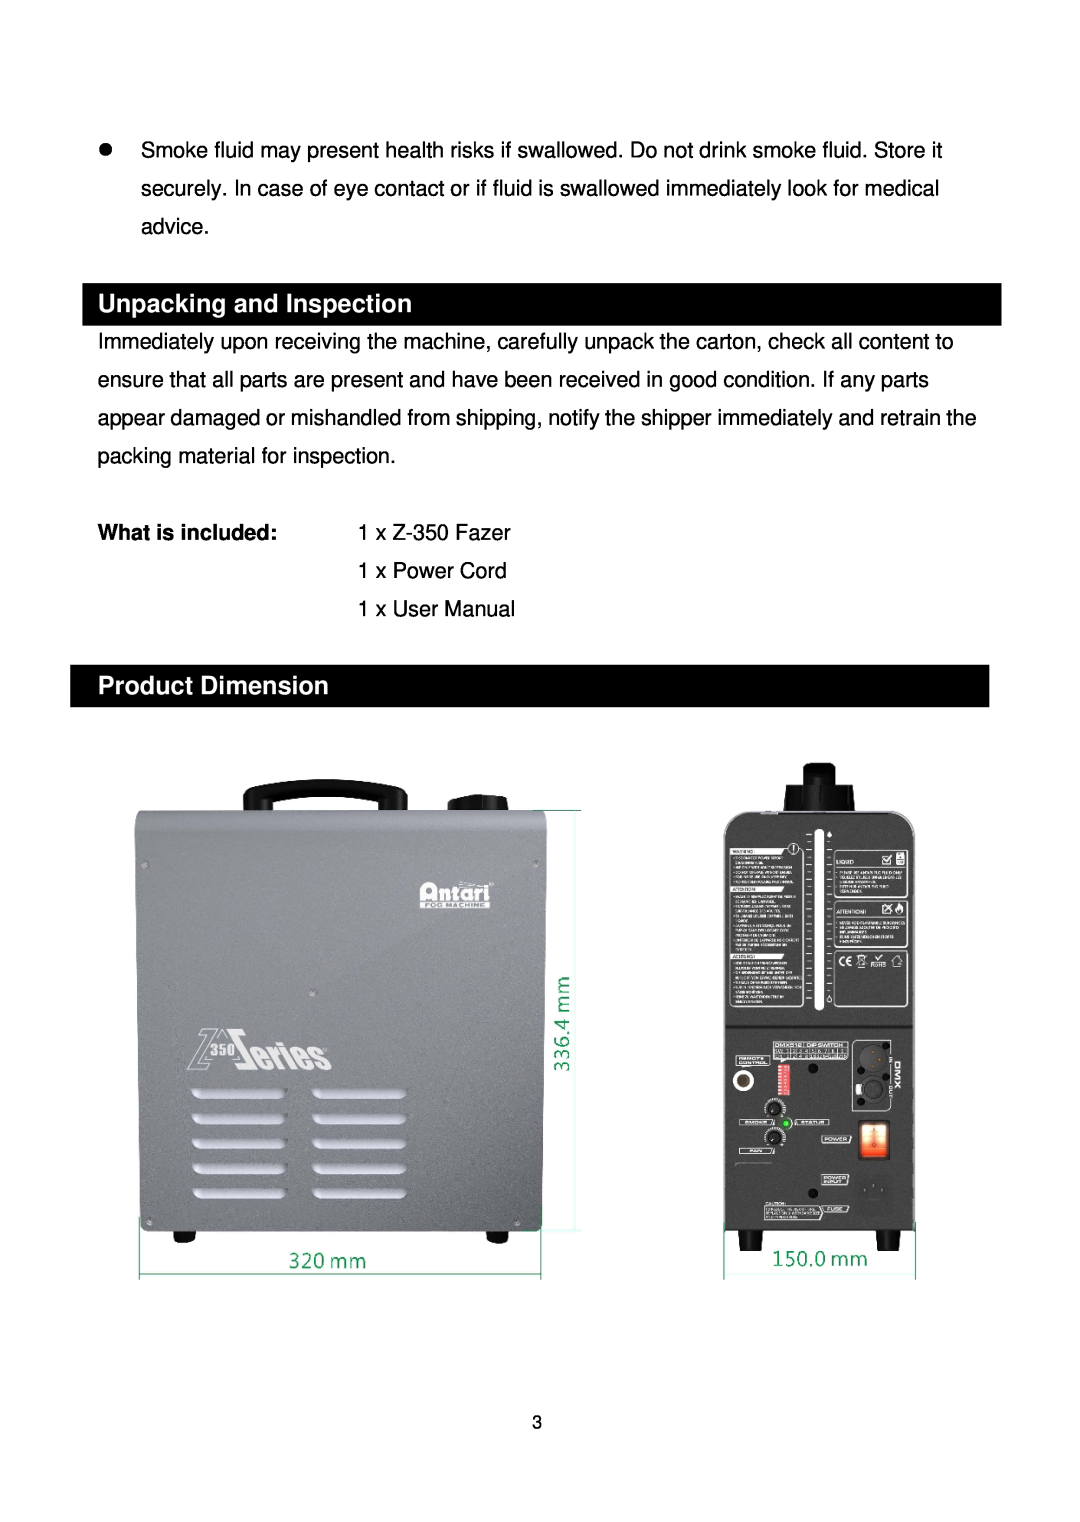 Antari Lighting and Effects Z-350 user manual Unpacking and Inspection, Product Dimension, What is included 